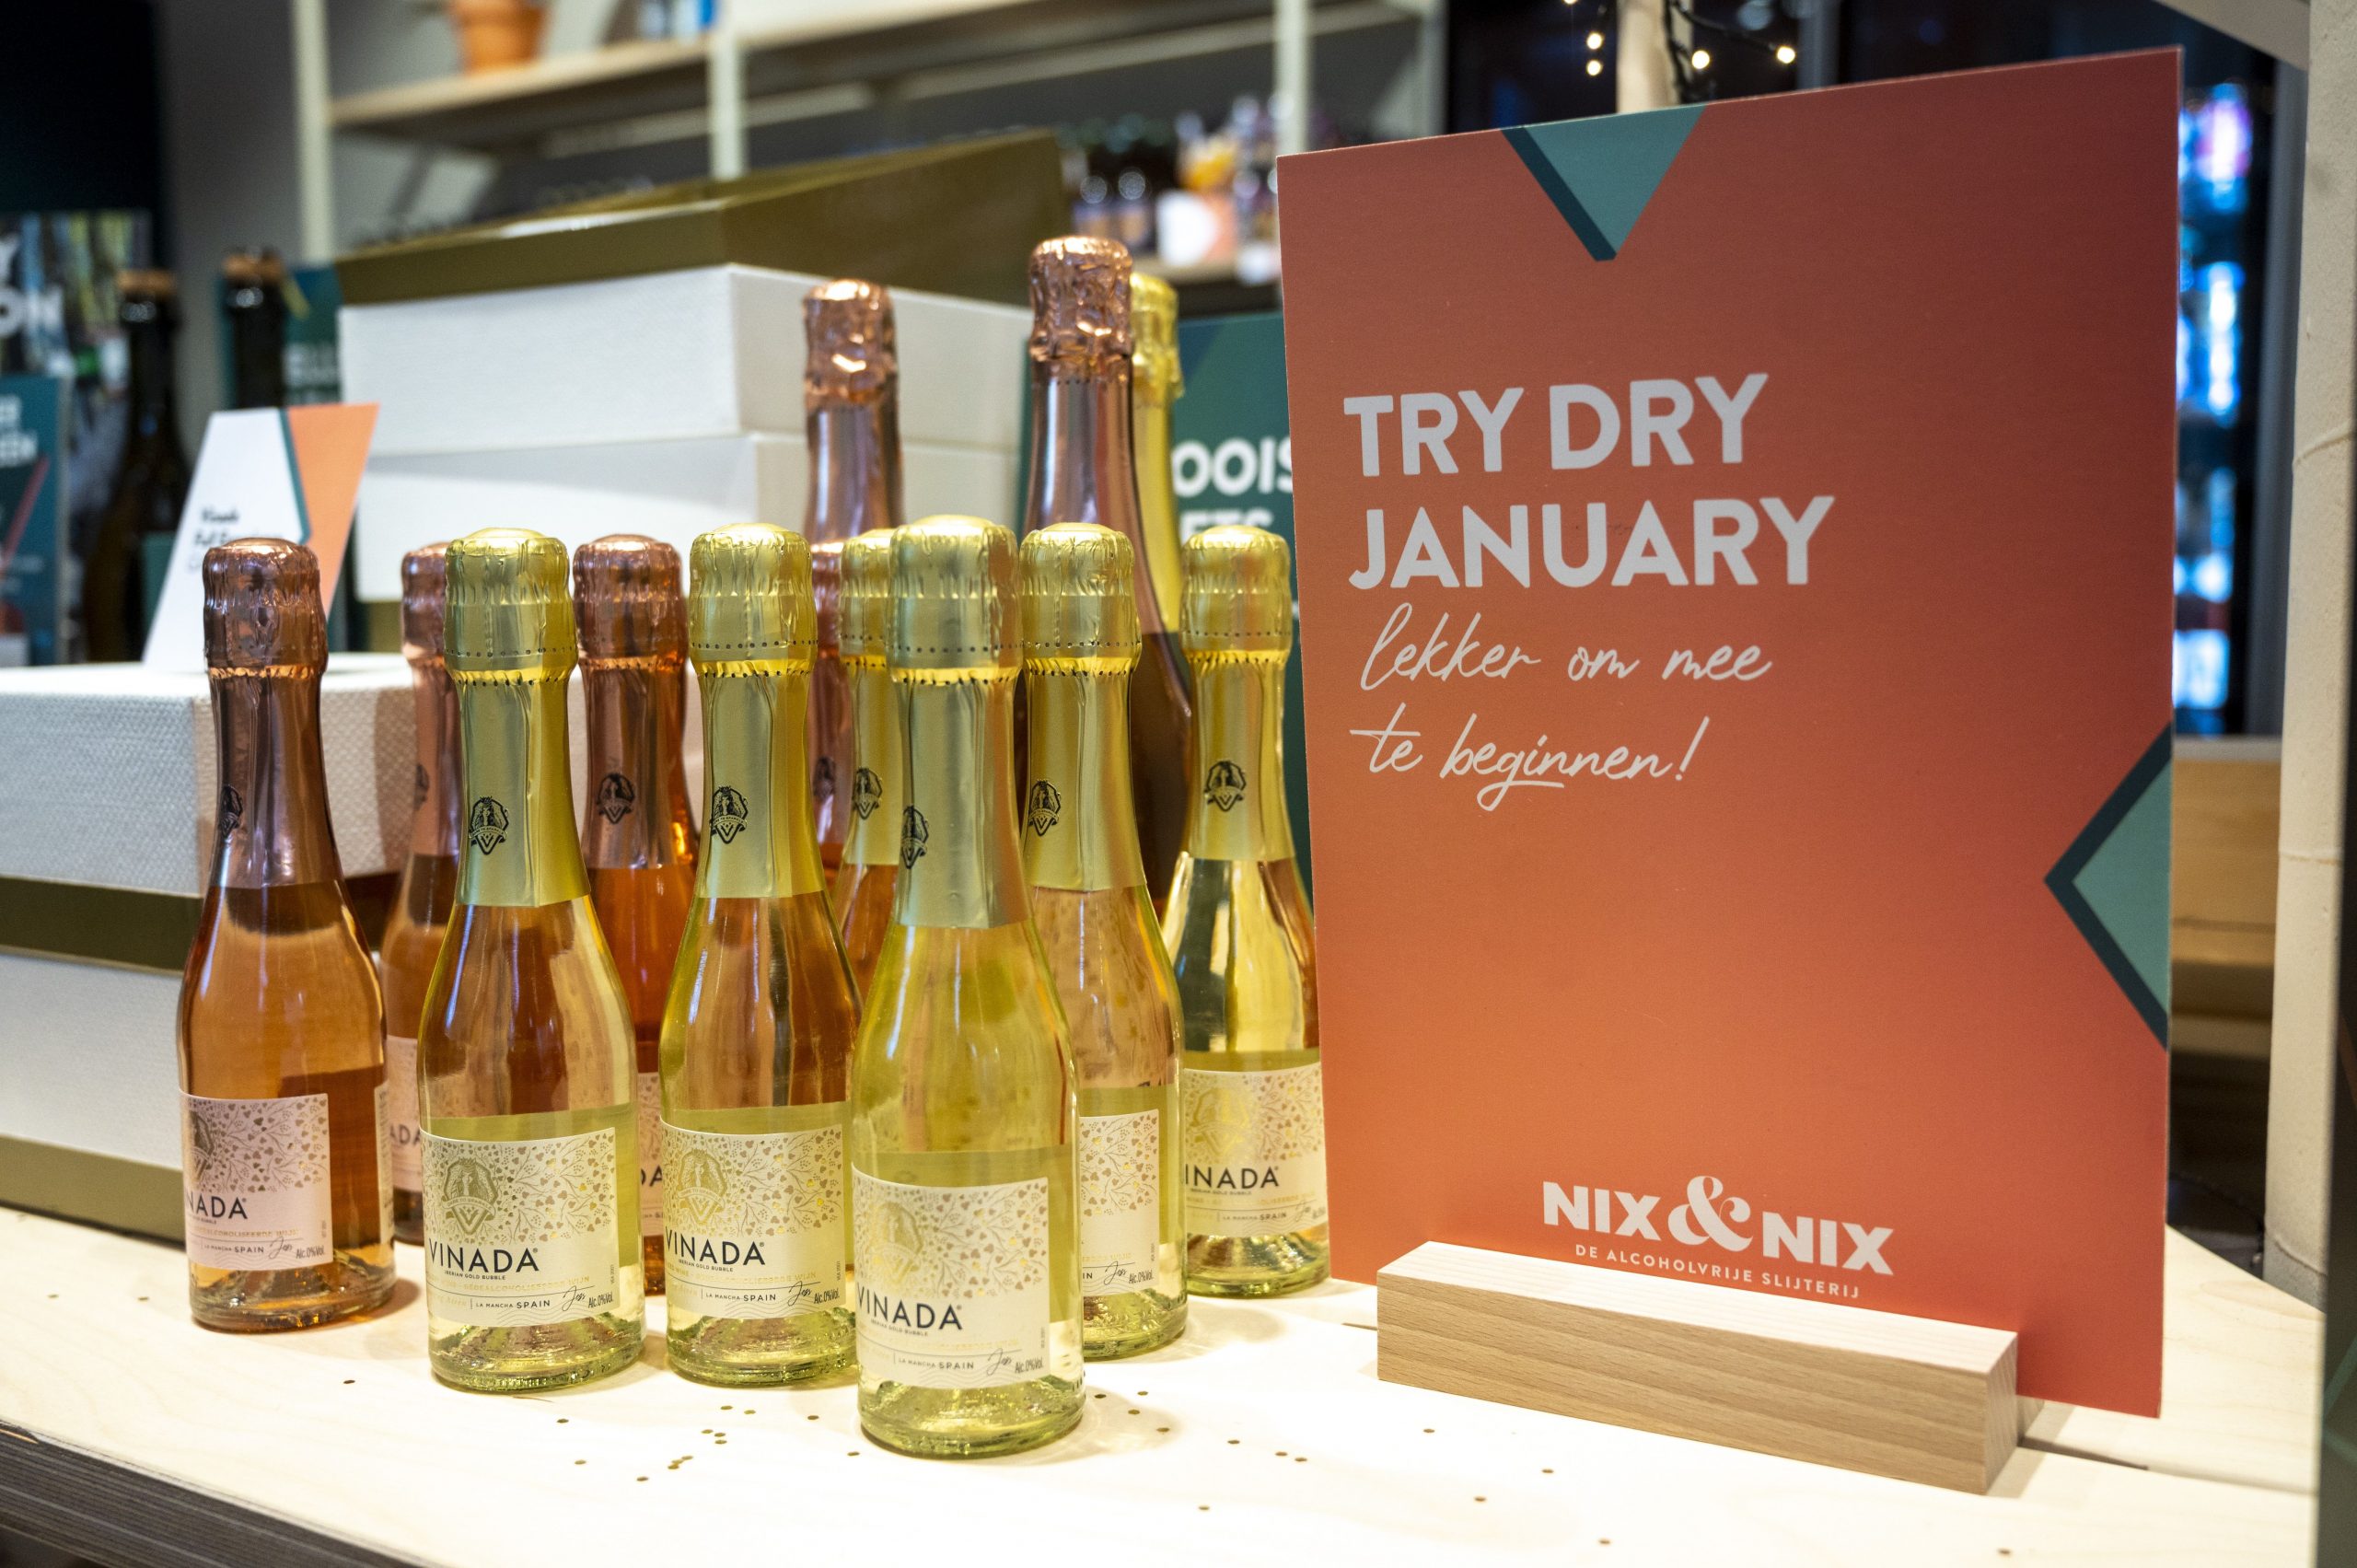 Alcohol free drinks on a shop display promoting Dry January